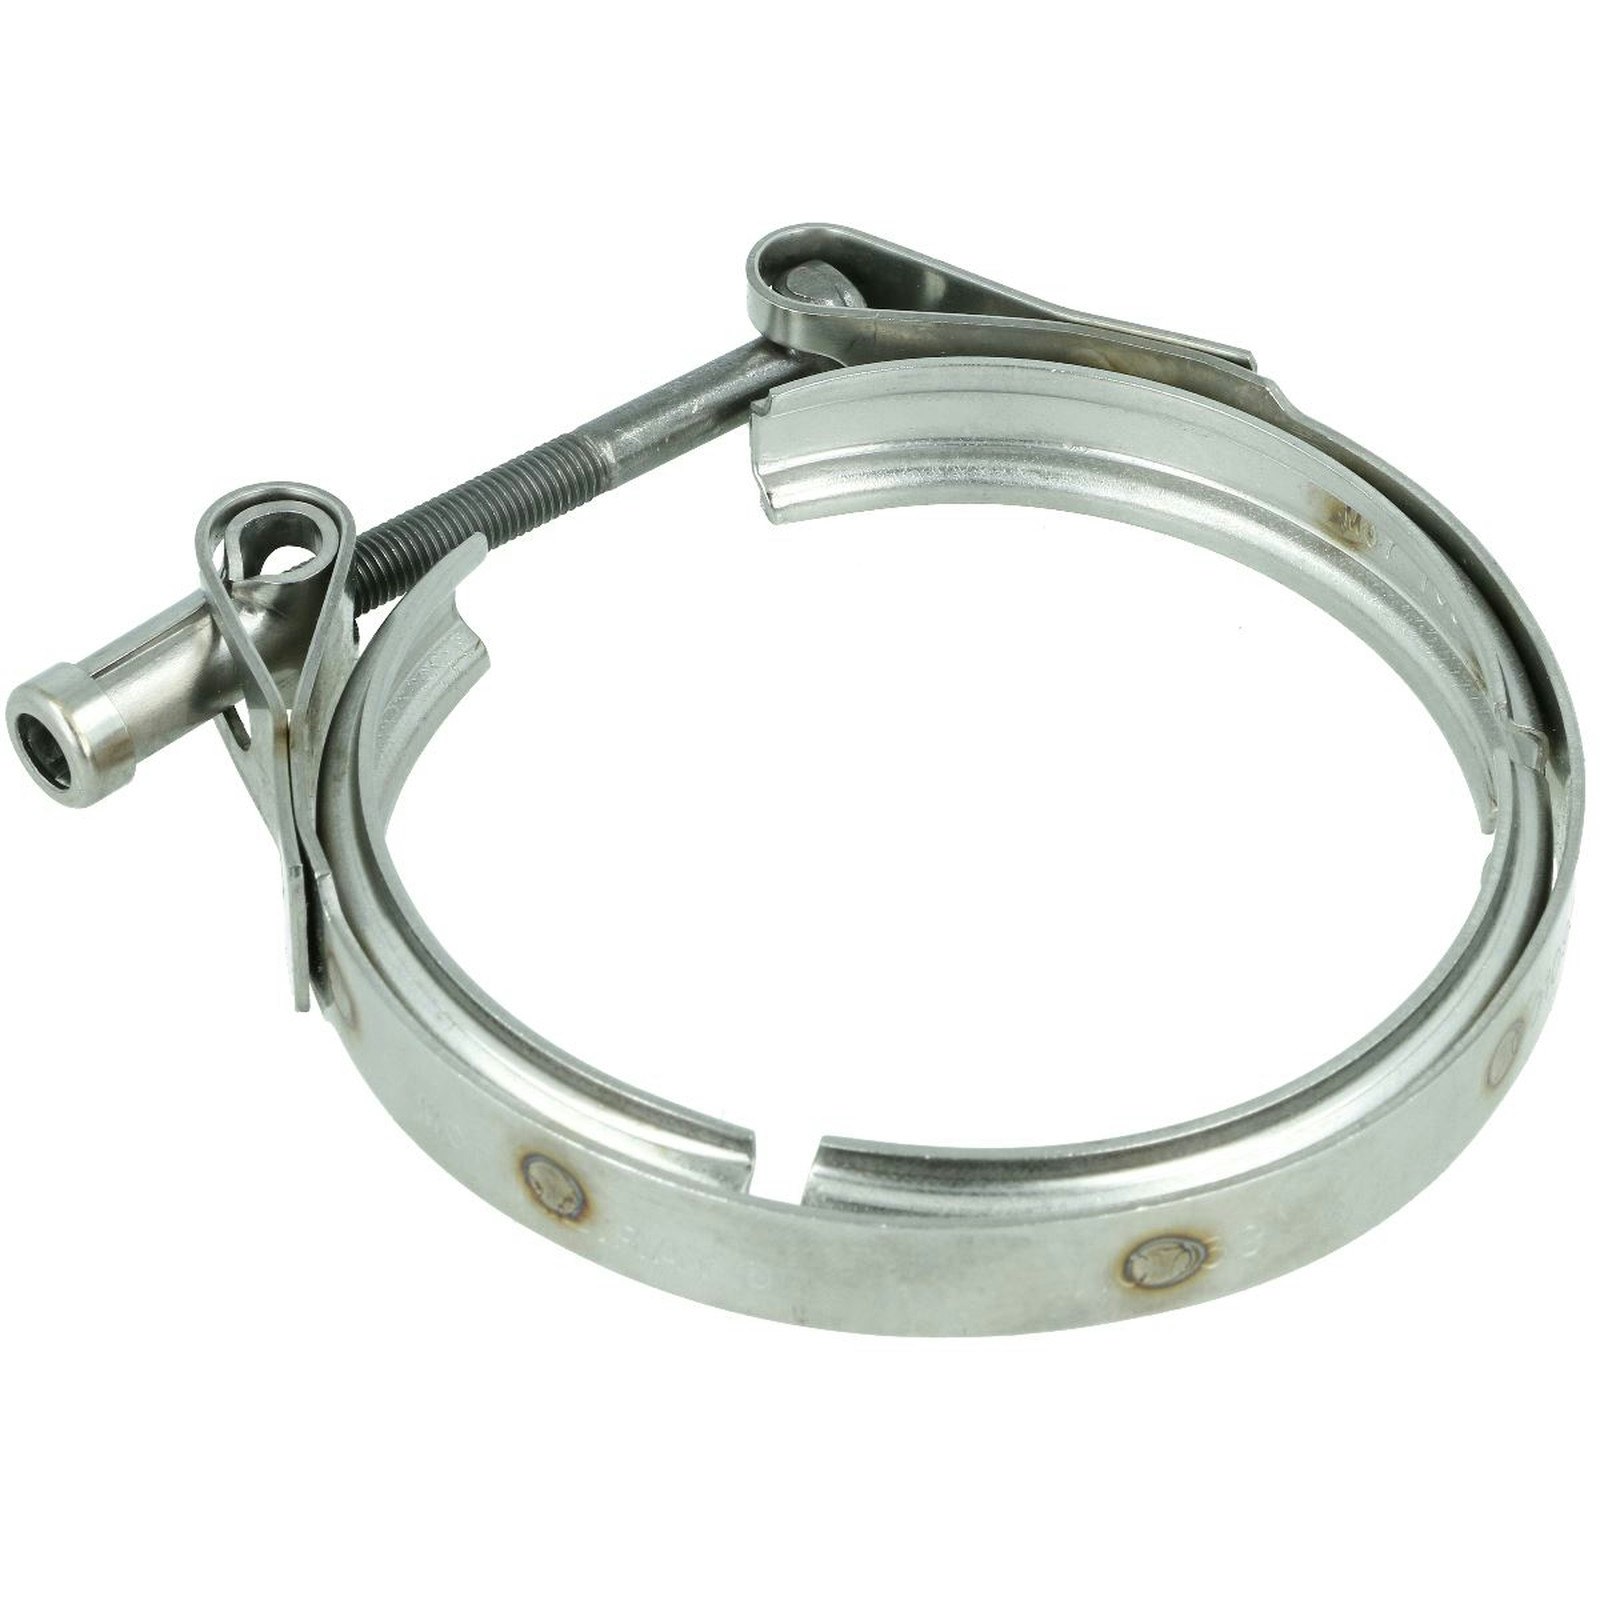 V-band clamp EFR exhaust